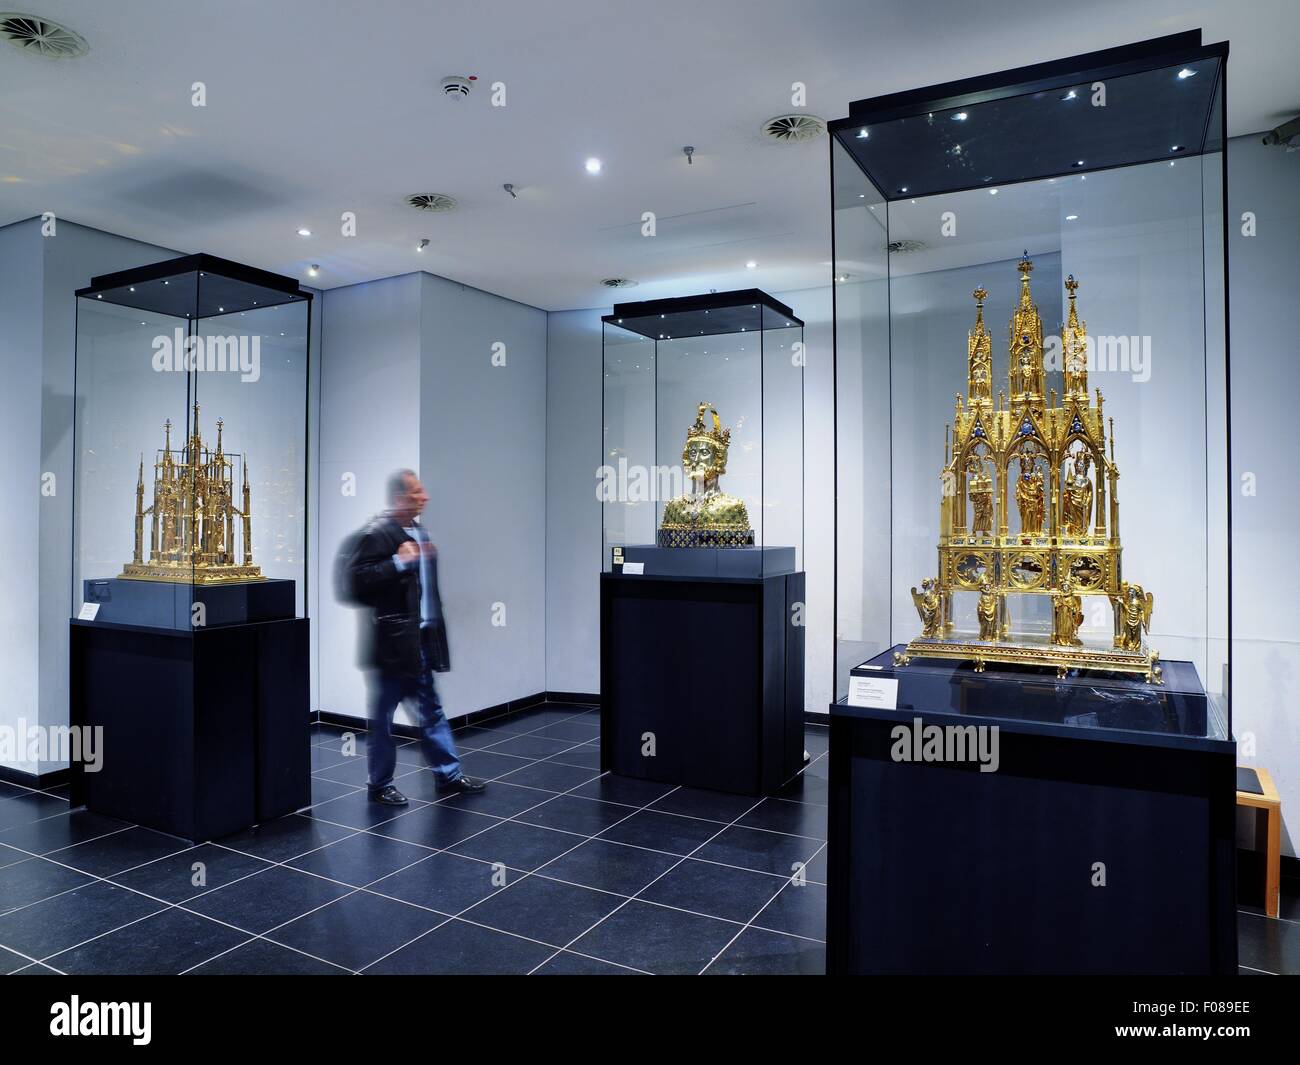 Man looking at exhibits in glass boxes at the Cathedral Treasury, Germany, blurred motion Stock Photo